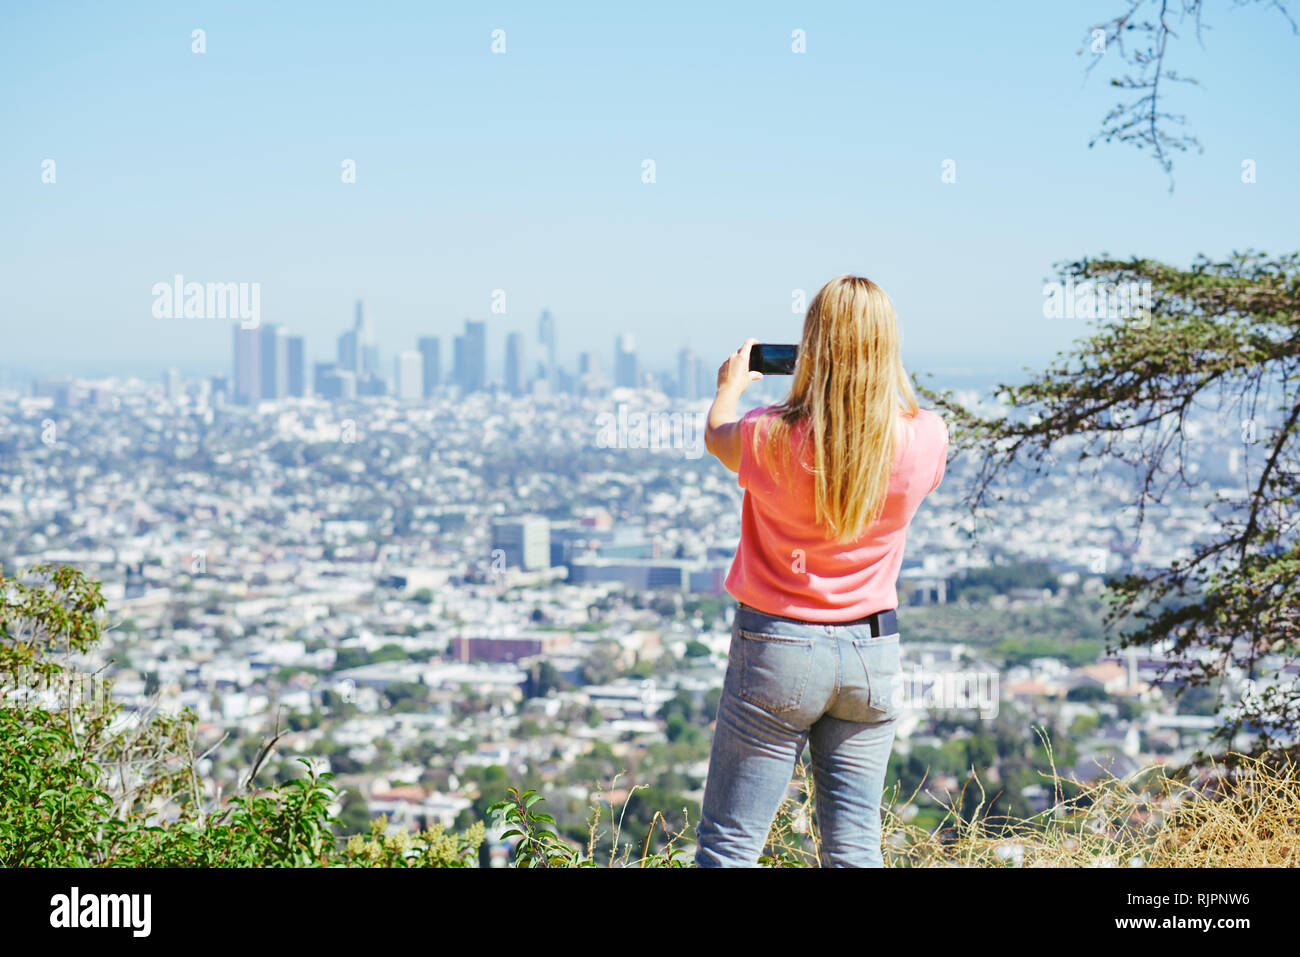 Young woman photographing skyline from hilltop, rear view, Los Angeles, California, USA Stock Photo